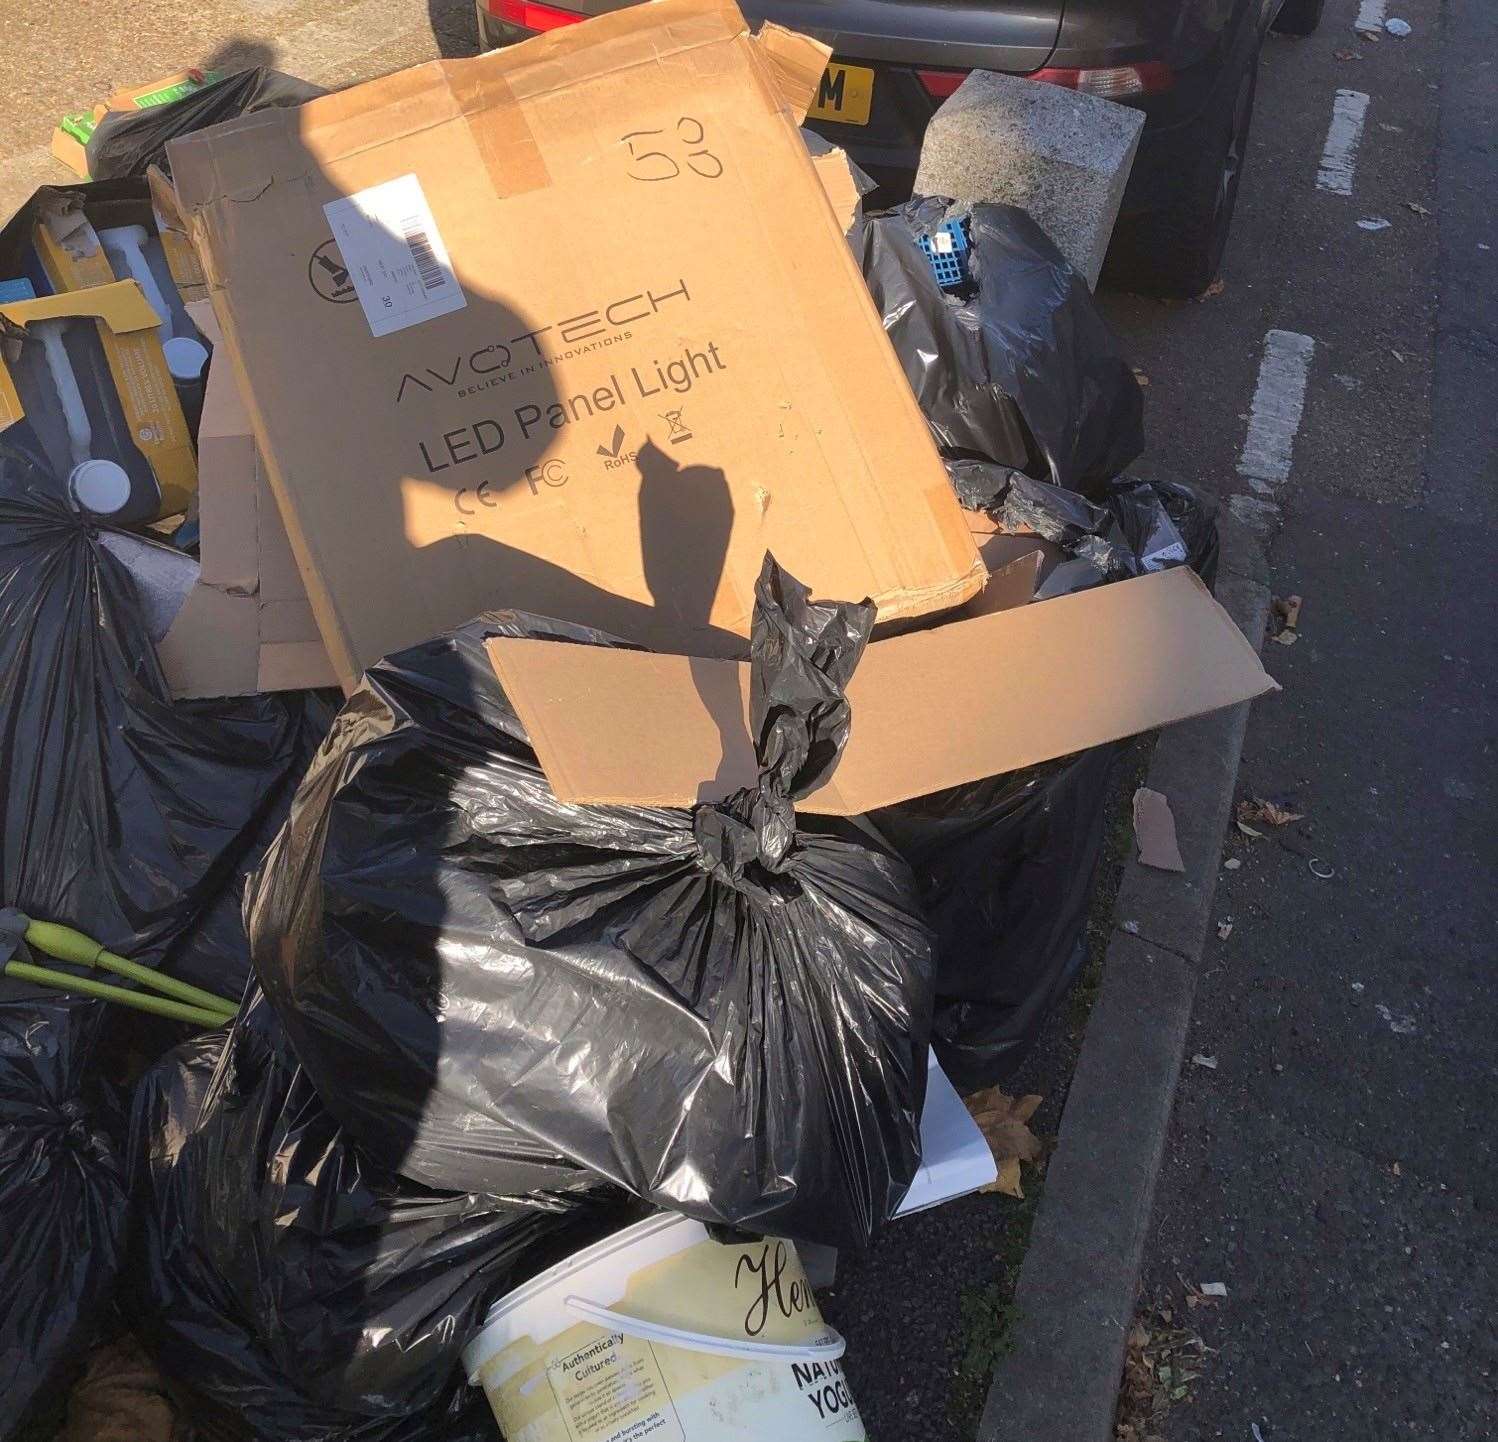 The latest spate of fly-tipping in Gravesham saw £400 worth of fines issued. Picture: Gravesham Council